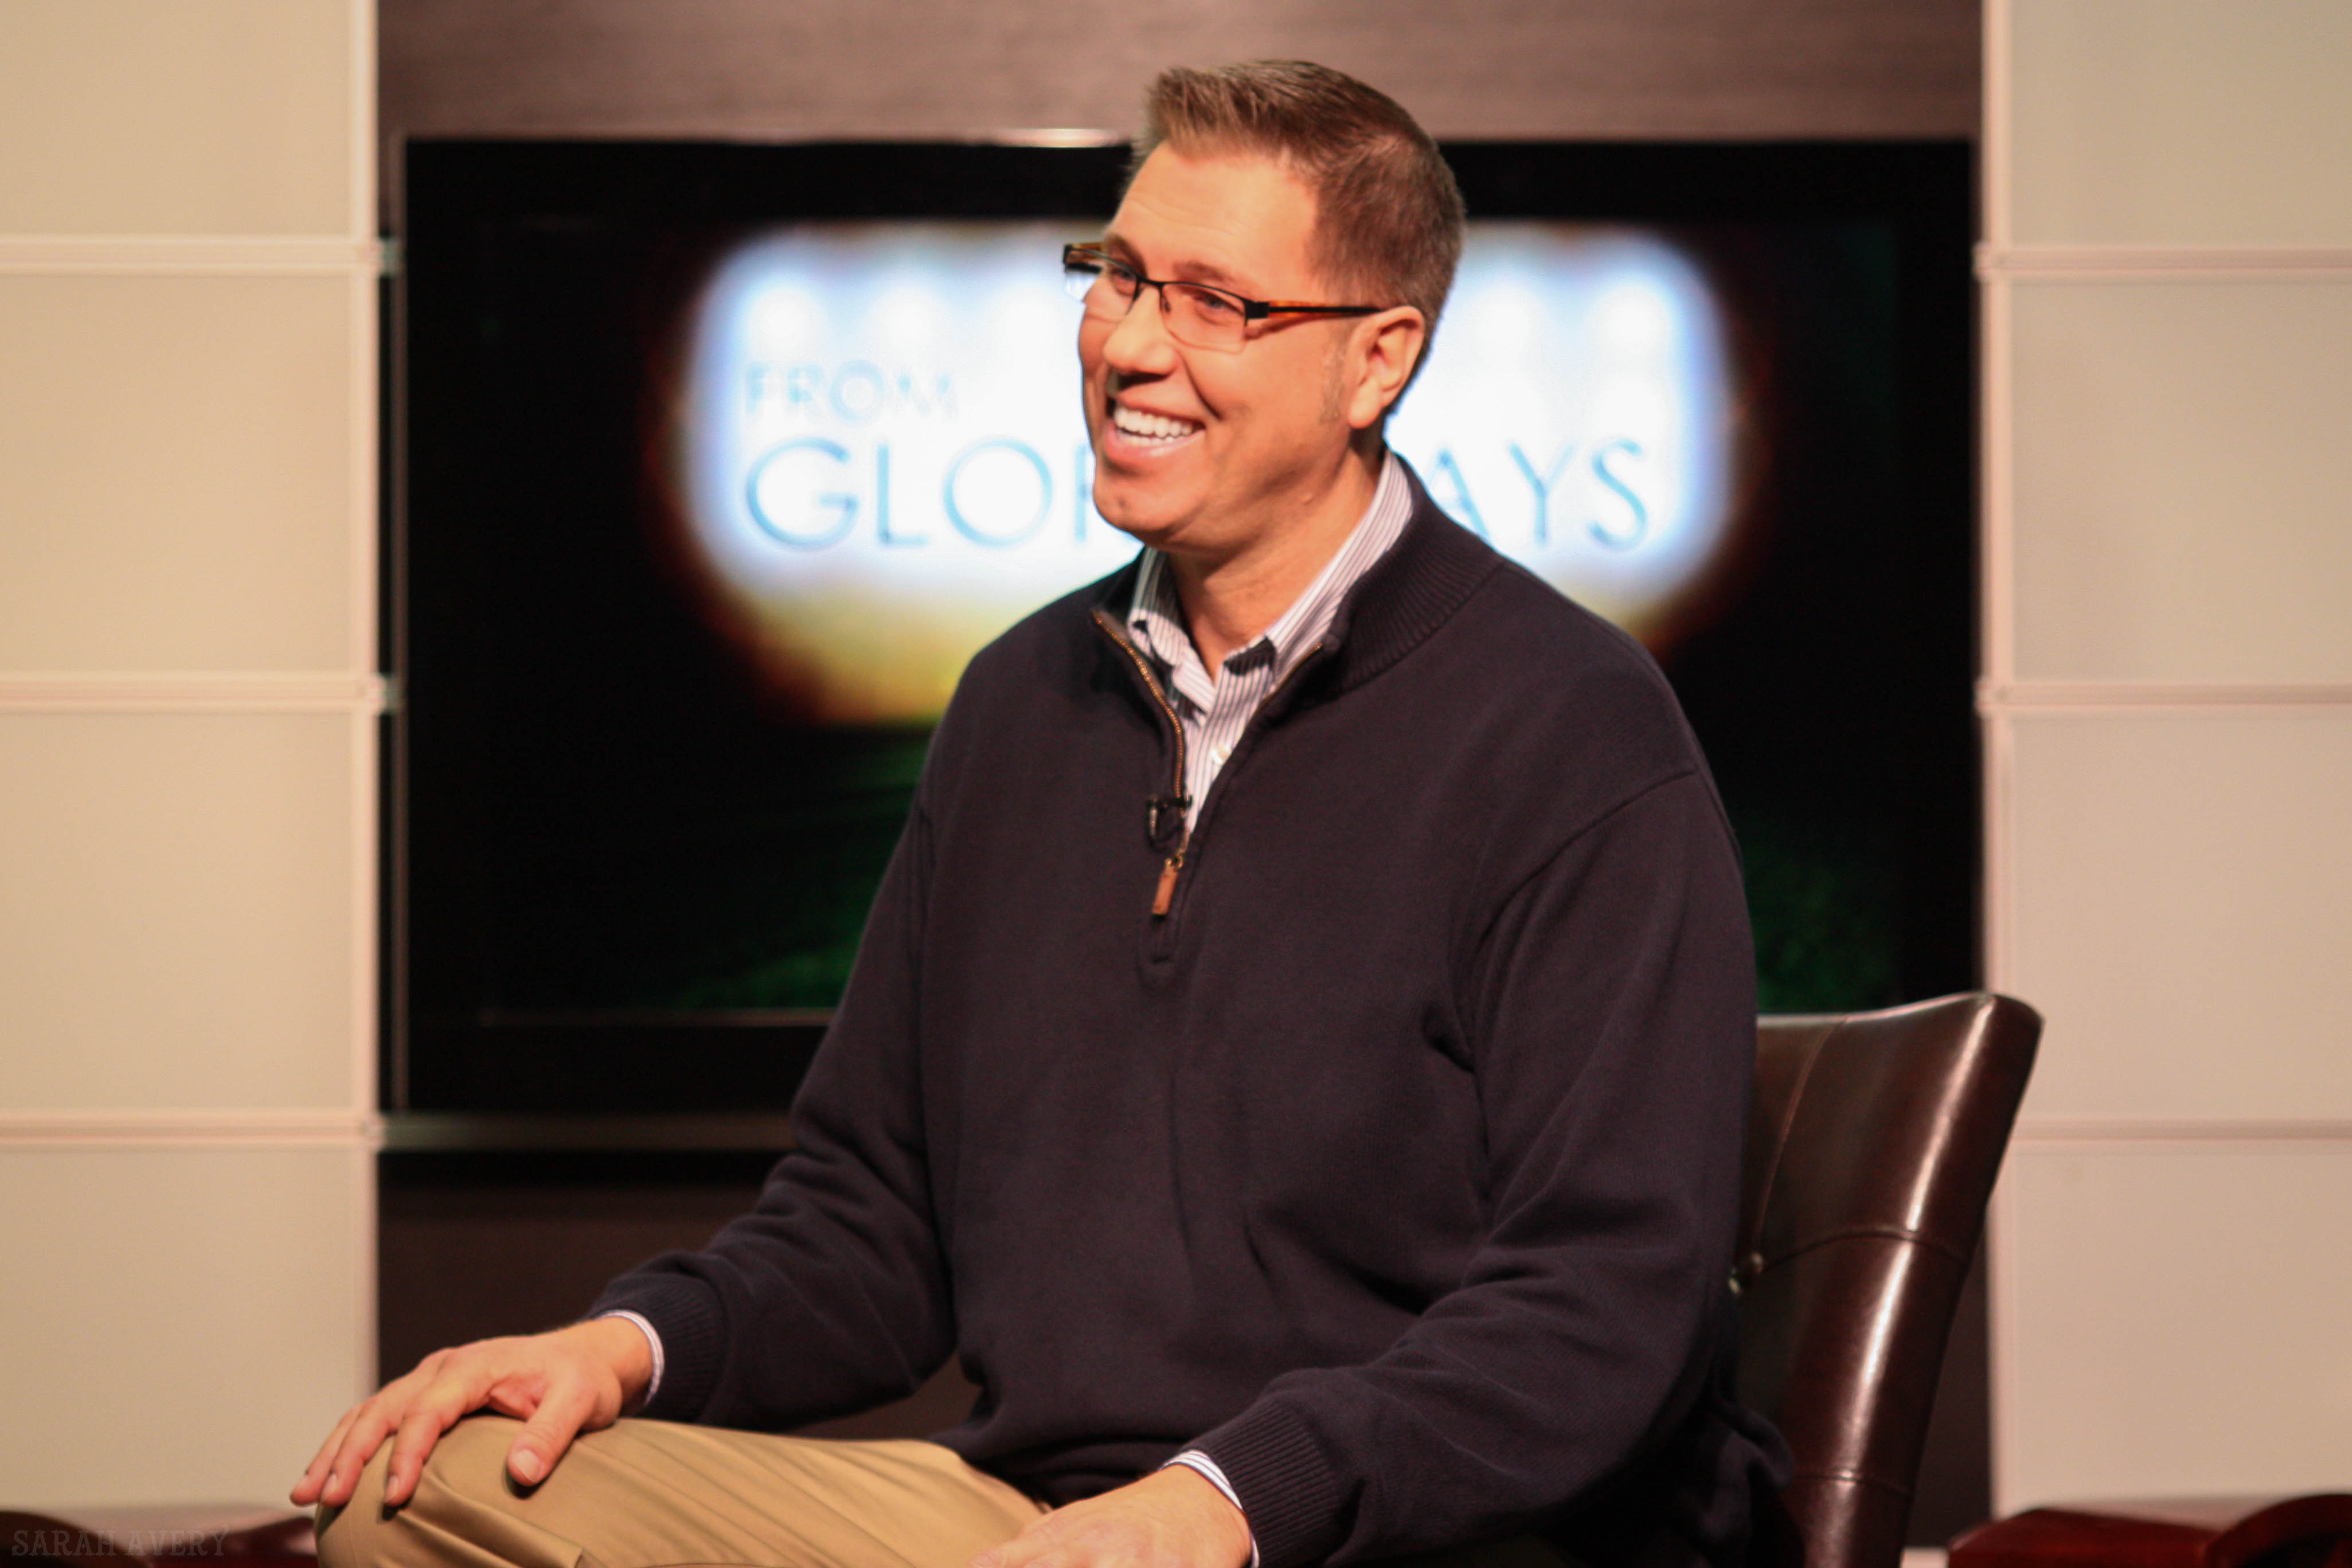 Host - Kurt A. David on set during taping of the TV show, 'From Glory Days'